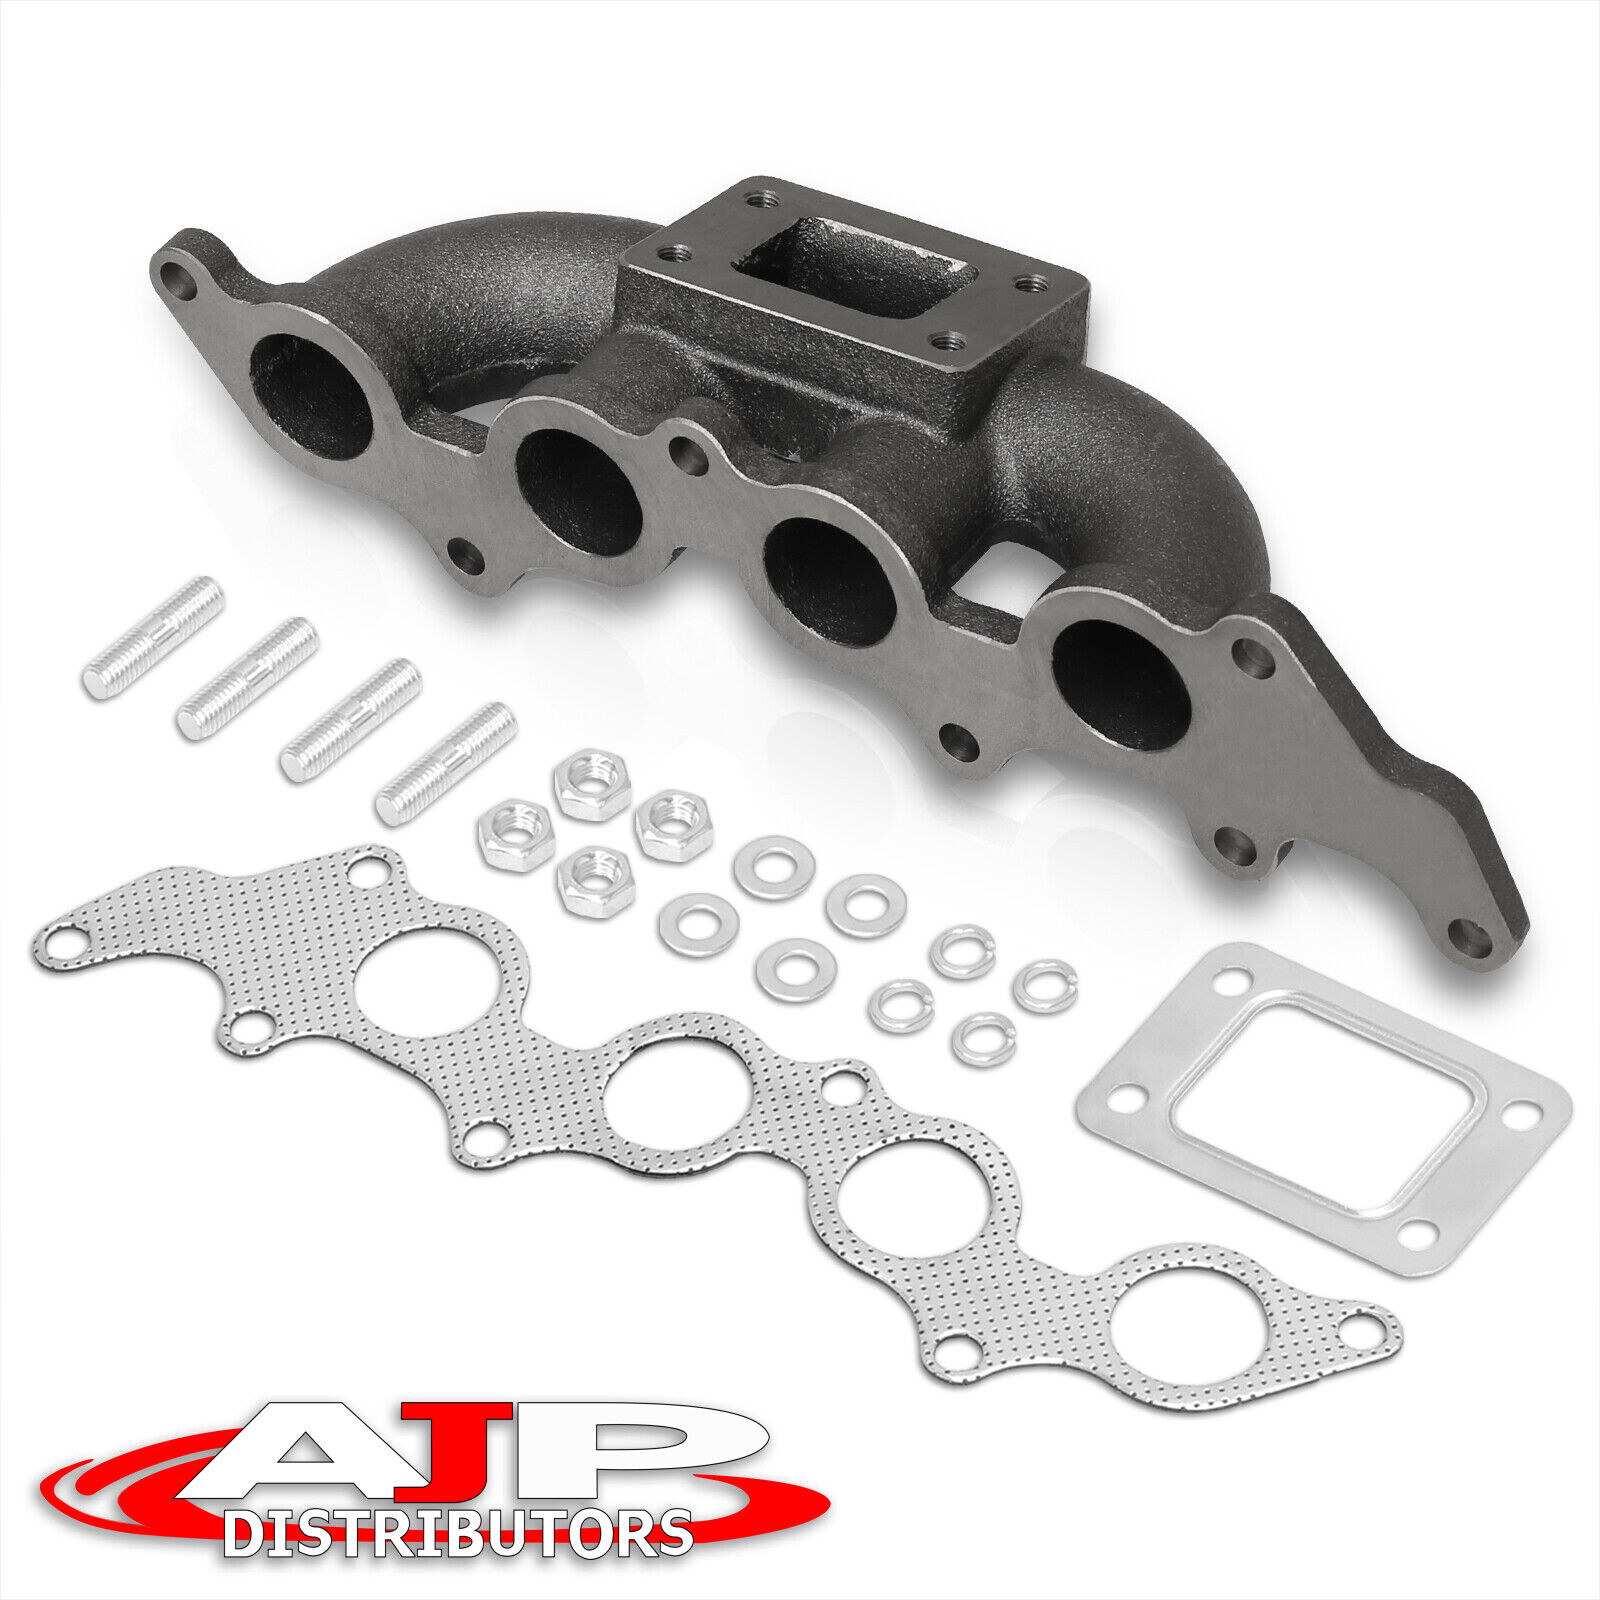 Cast T3 Flange Turbo Manifold Exhaust Header For Ford Focus 2.3L / Mazda 3 2.0L